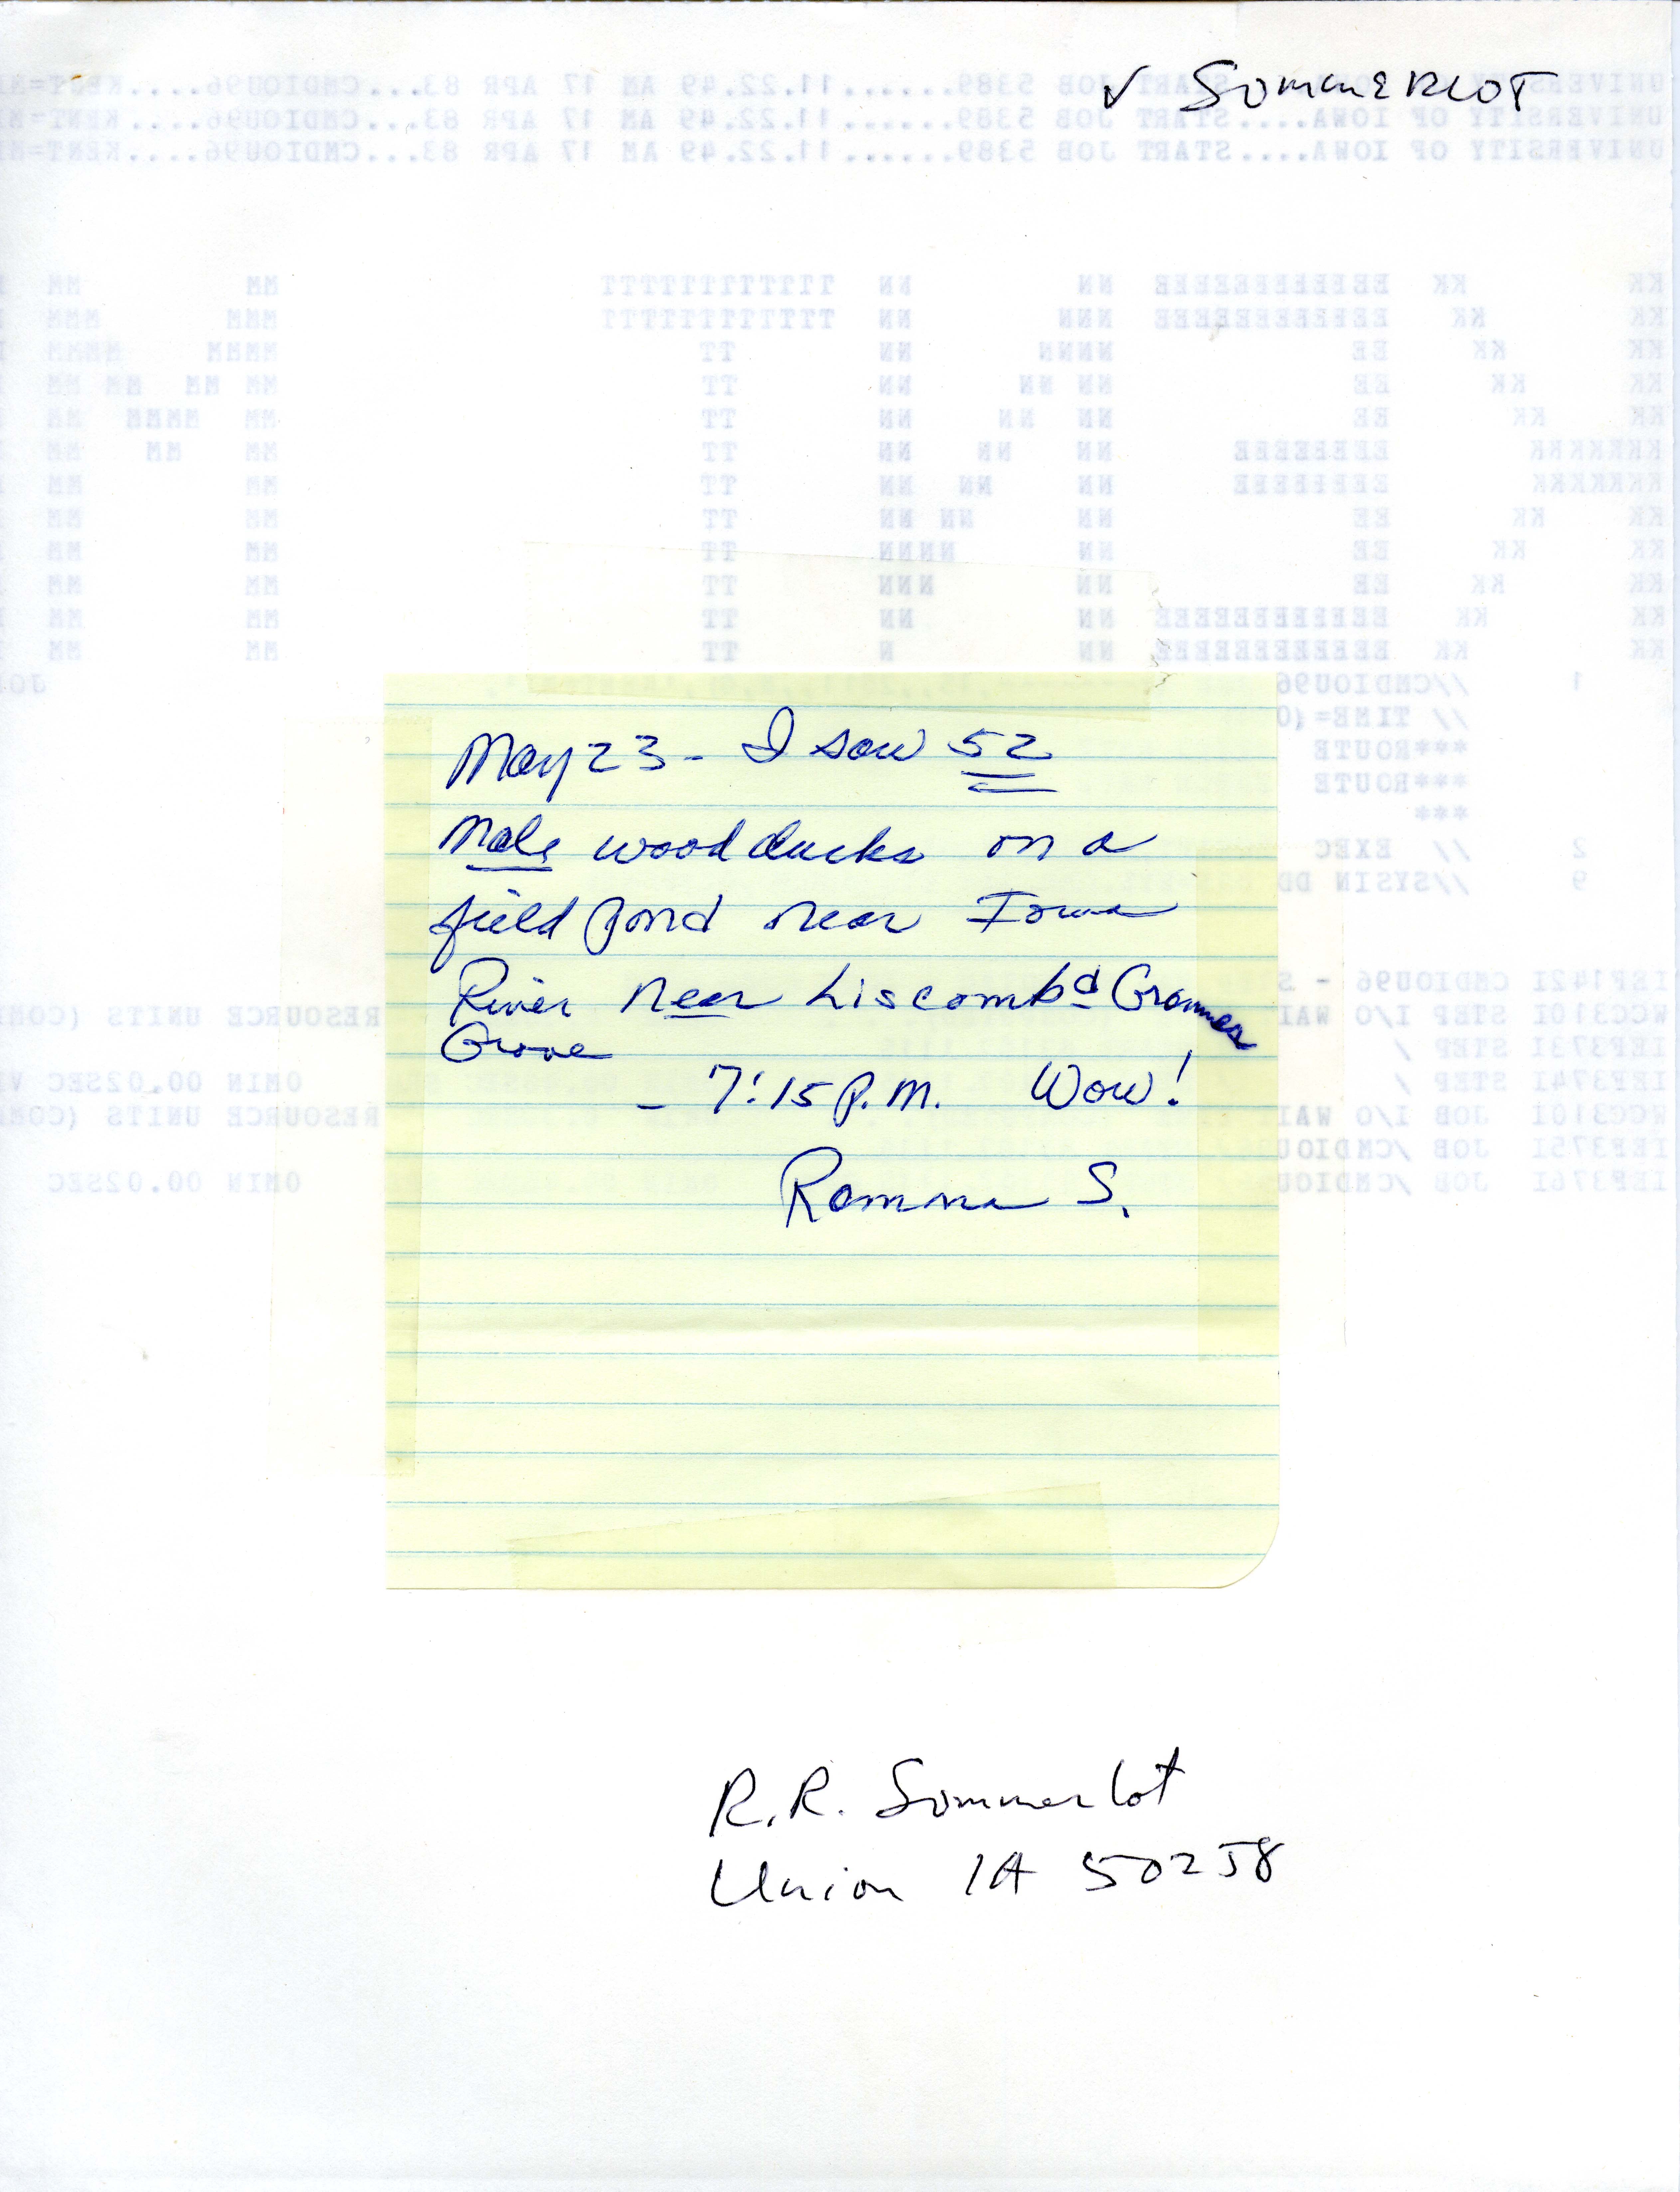 Field note about a Wood Duck sighting contributed by Ramona R. Sommerlot, May 23, 1983